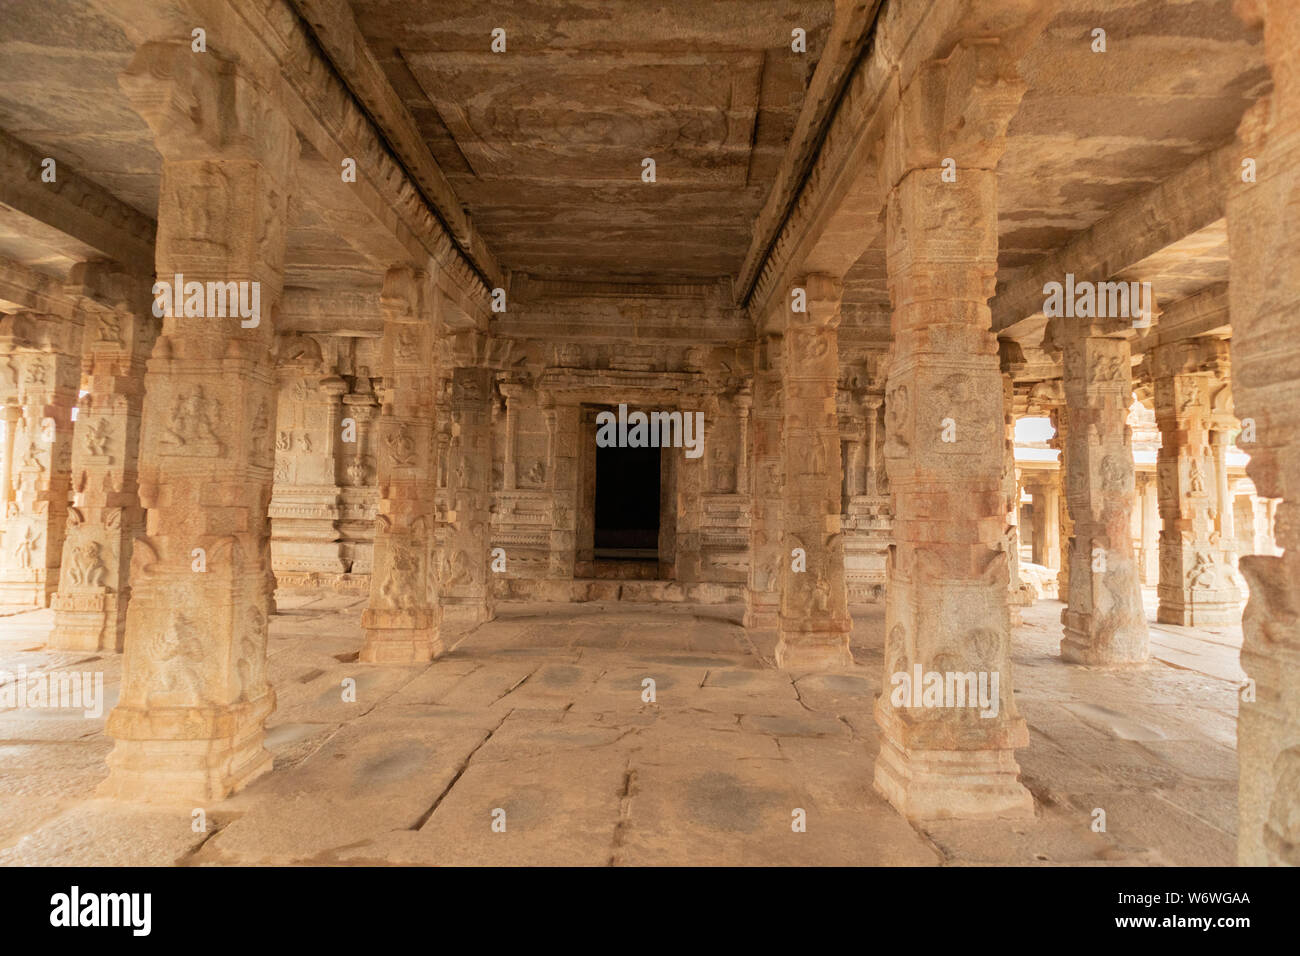 Stone piller showing of ancient architecture inside the ruined krishna temple at Hampi, India. Stock Photo